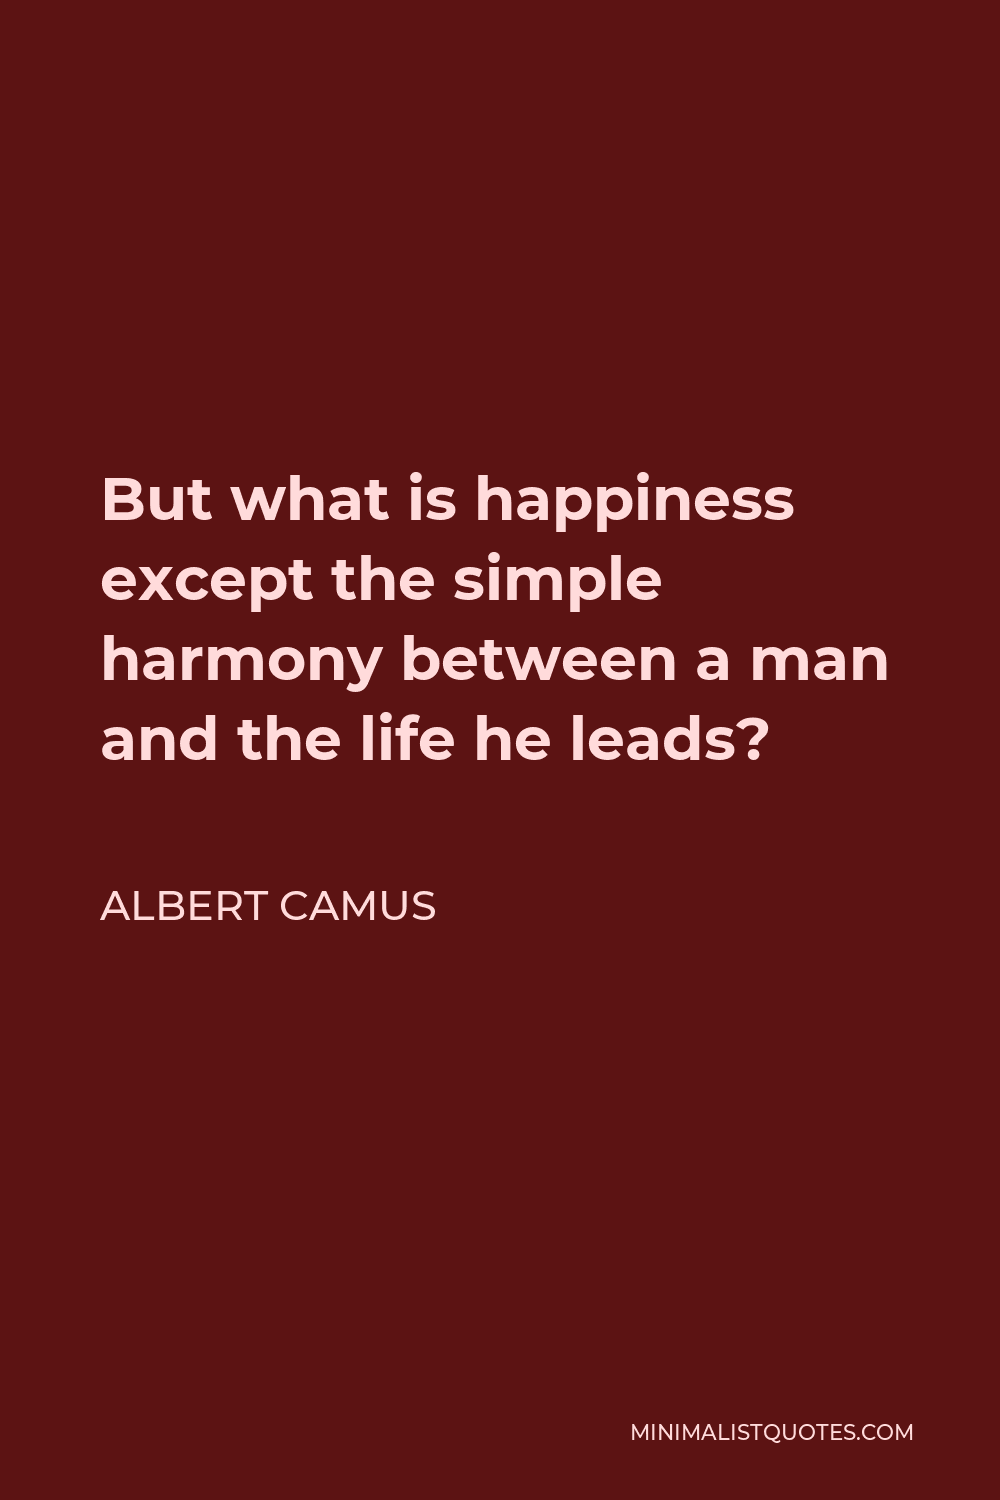 Albert Camus Quote - But what is happiness except the simple harmony between a man and the life he leads?